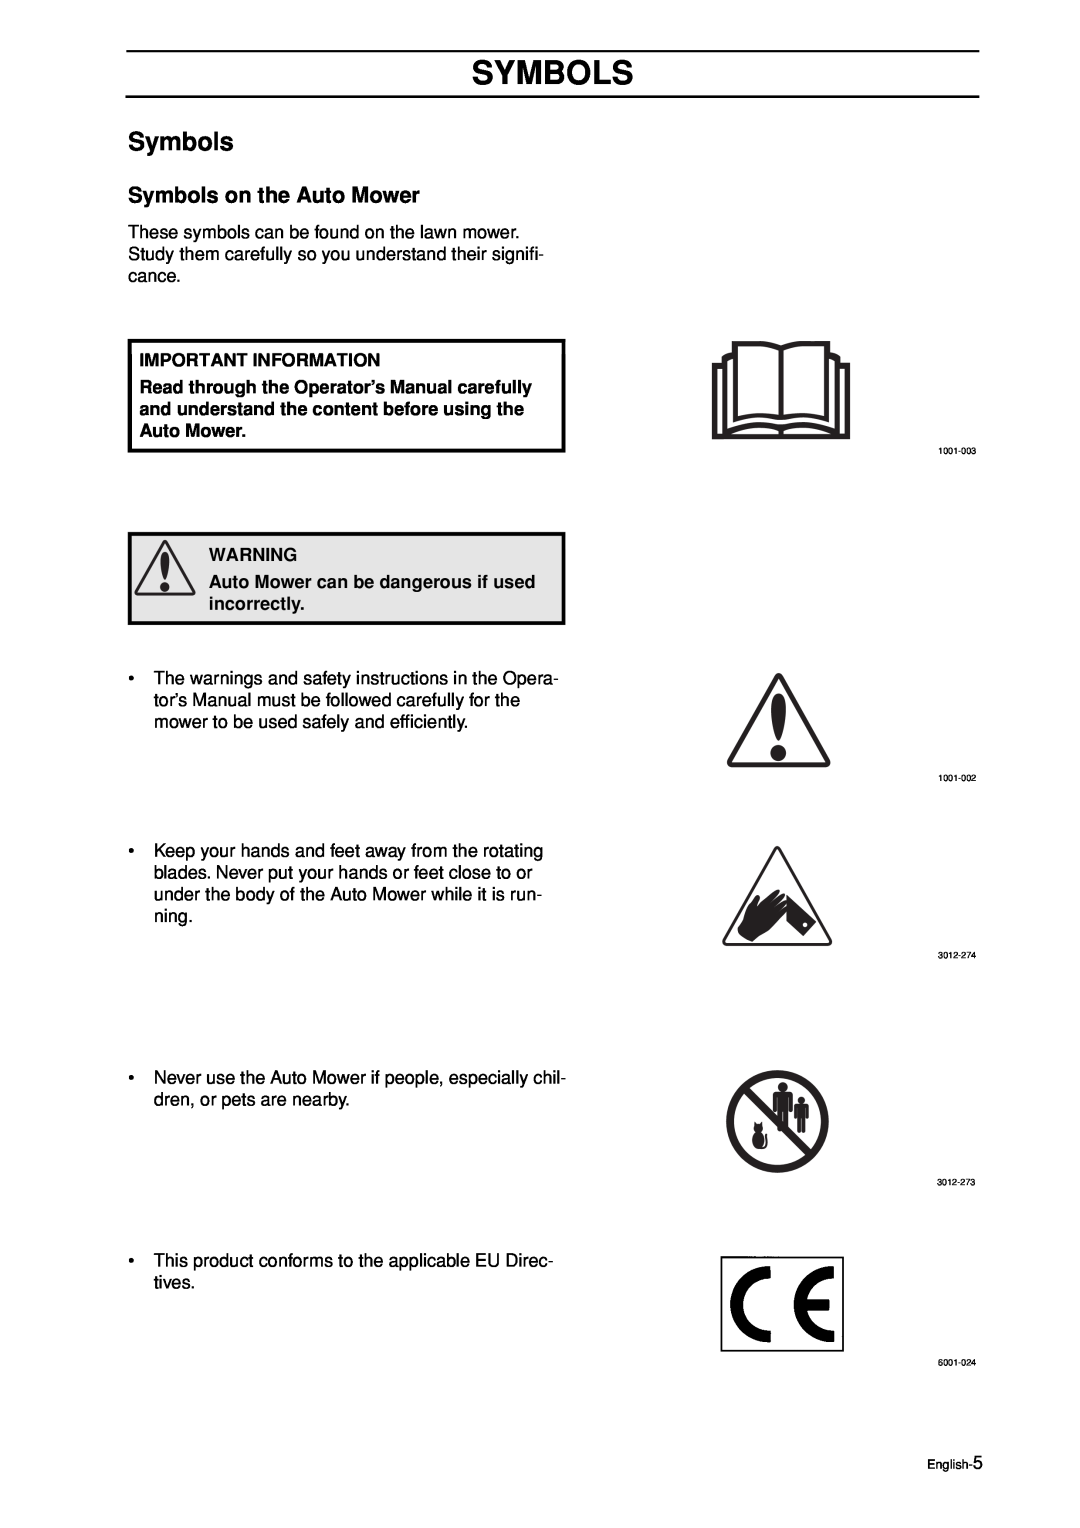 Husqvarna manual Symbols on the Auto Mower, Important Information, Auto Mower can be dangerous if used incorrectly 